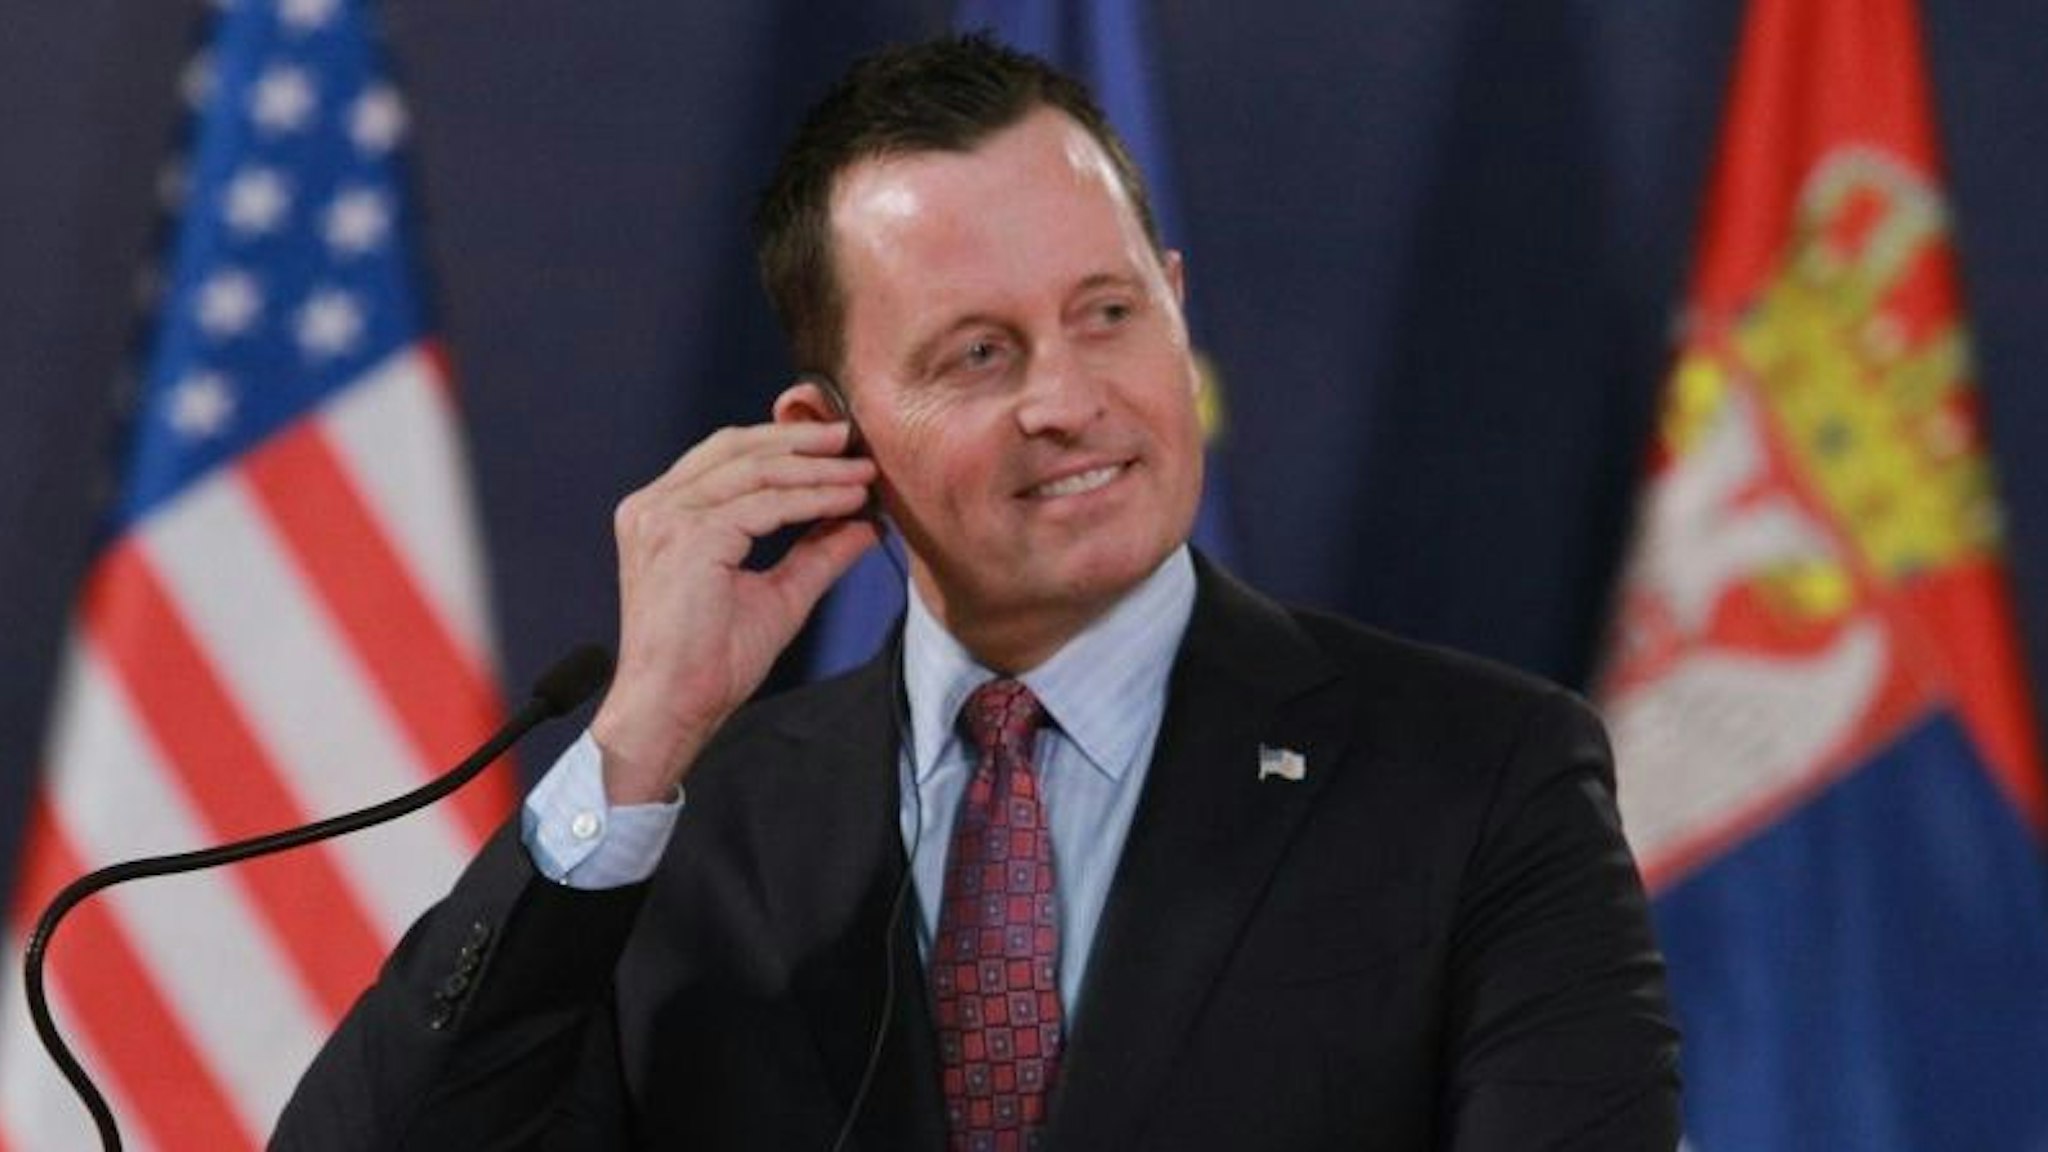 U.S. envoy for the Kosovo-Serbia dialogue, Richard Grenell listens during a joint press conference held with Serbian President Aleksandar Vucic (not seen) following their meeting in Belgrade, Serbia on January 24, 2020. (Photo by Milos Miskov/Anadolu Agency via Getty Images)